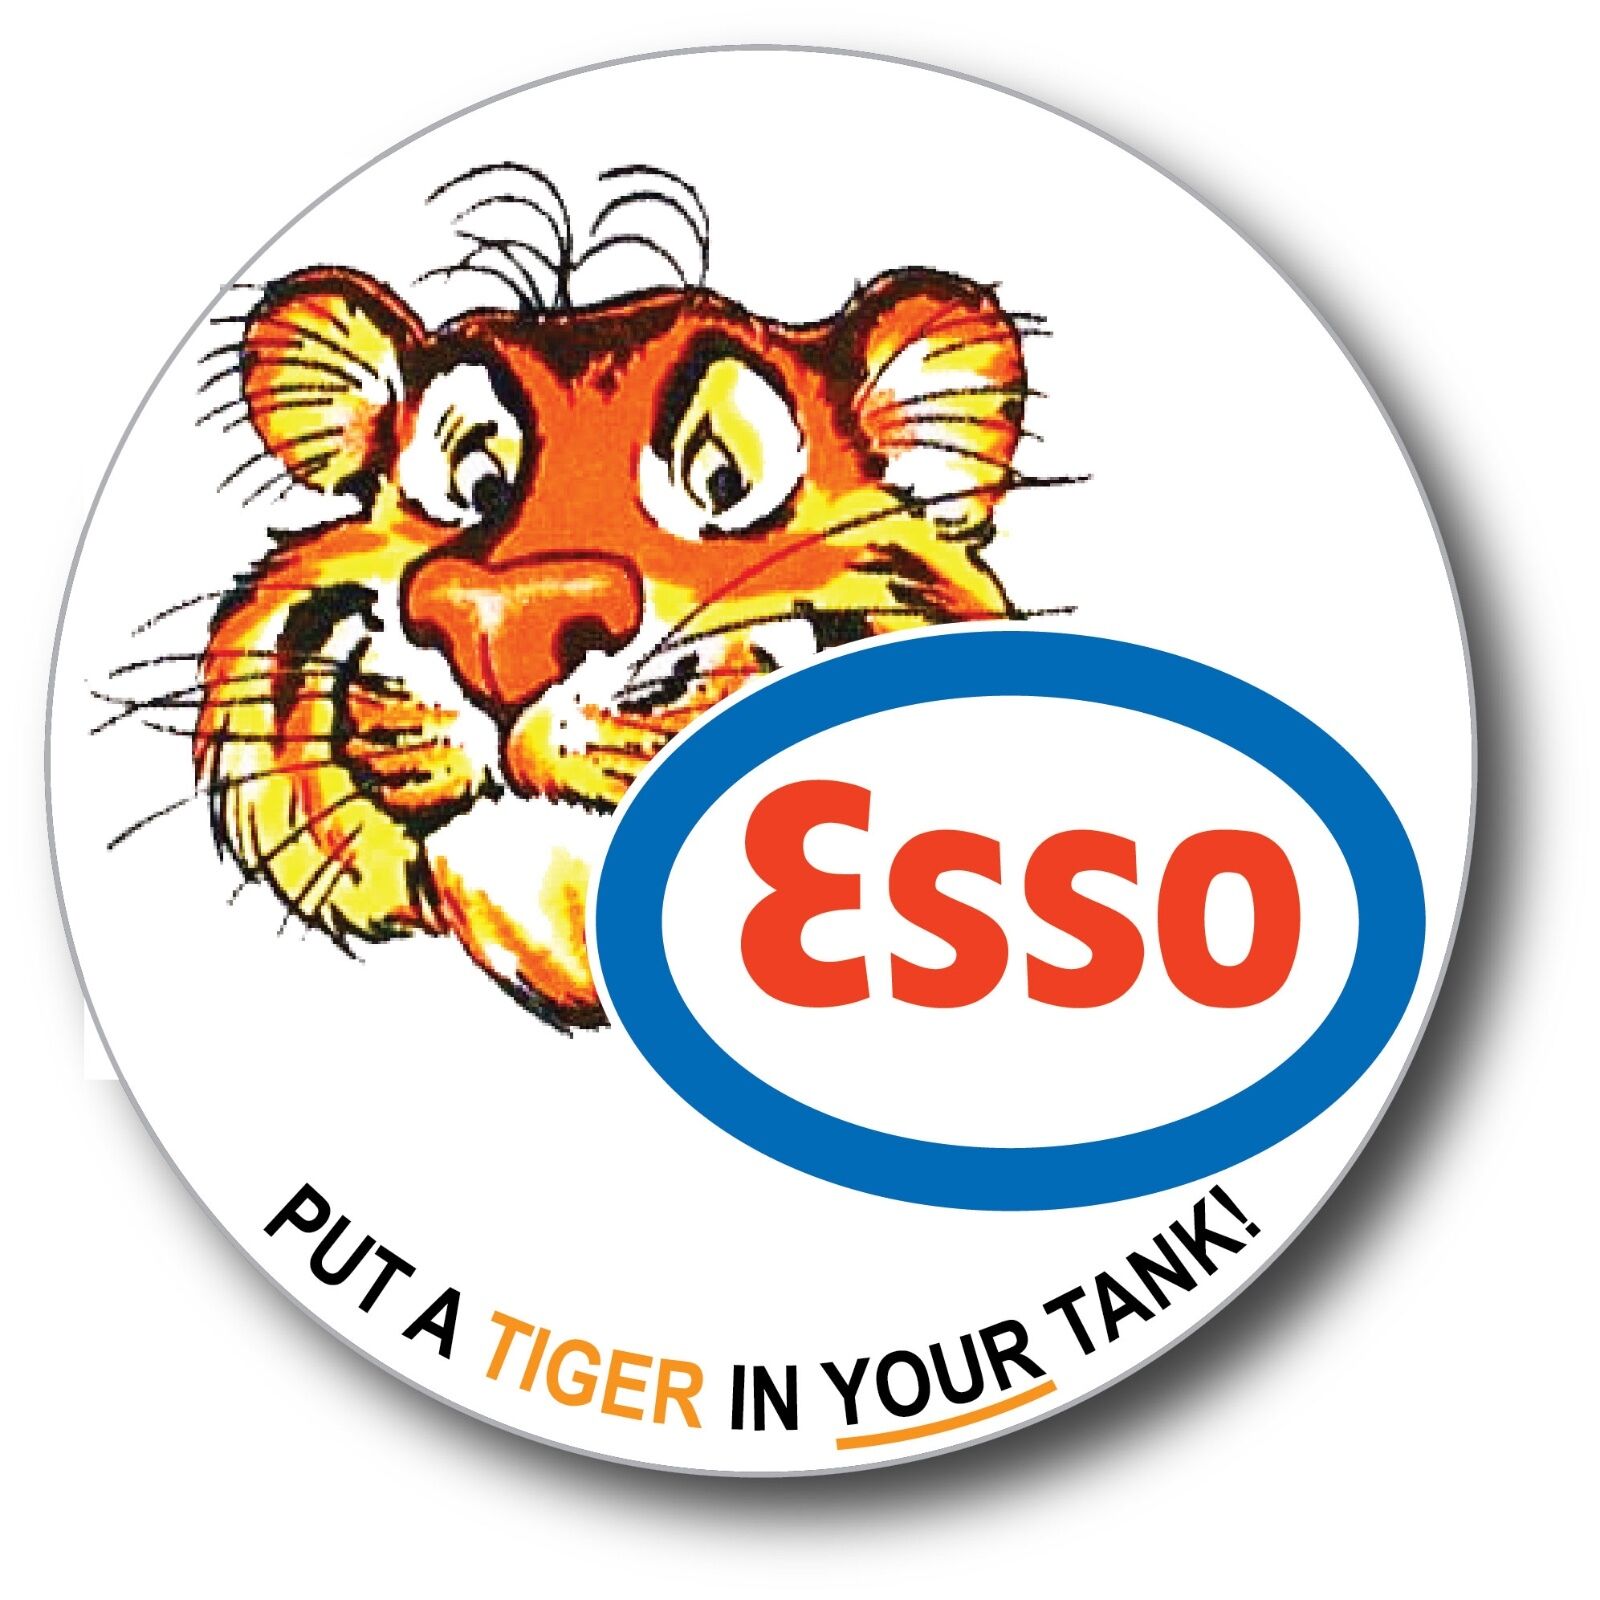 Esso Gasoline Tiger In Your Tank High Gloss Outdoor 3.5 Inch Decal Sticker